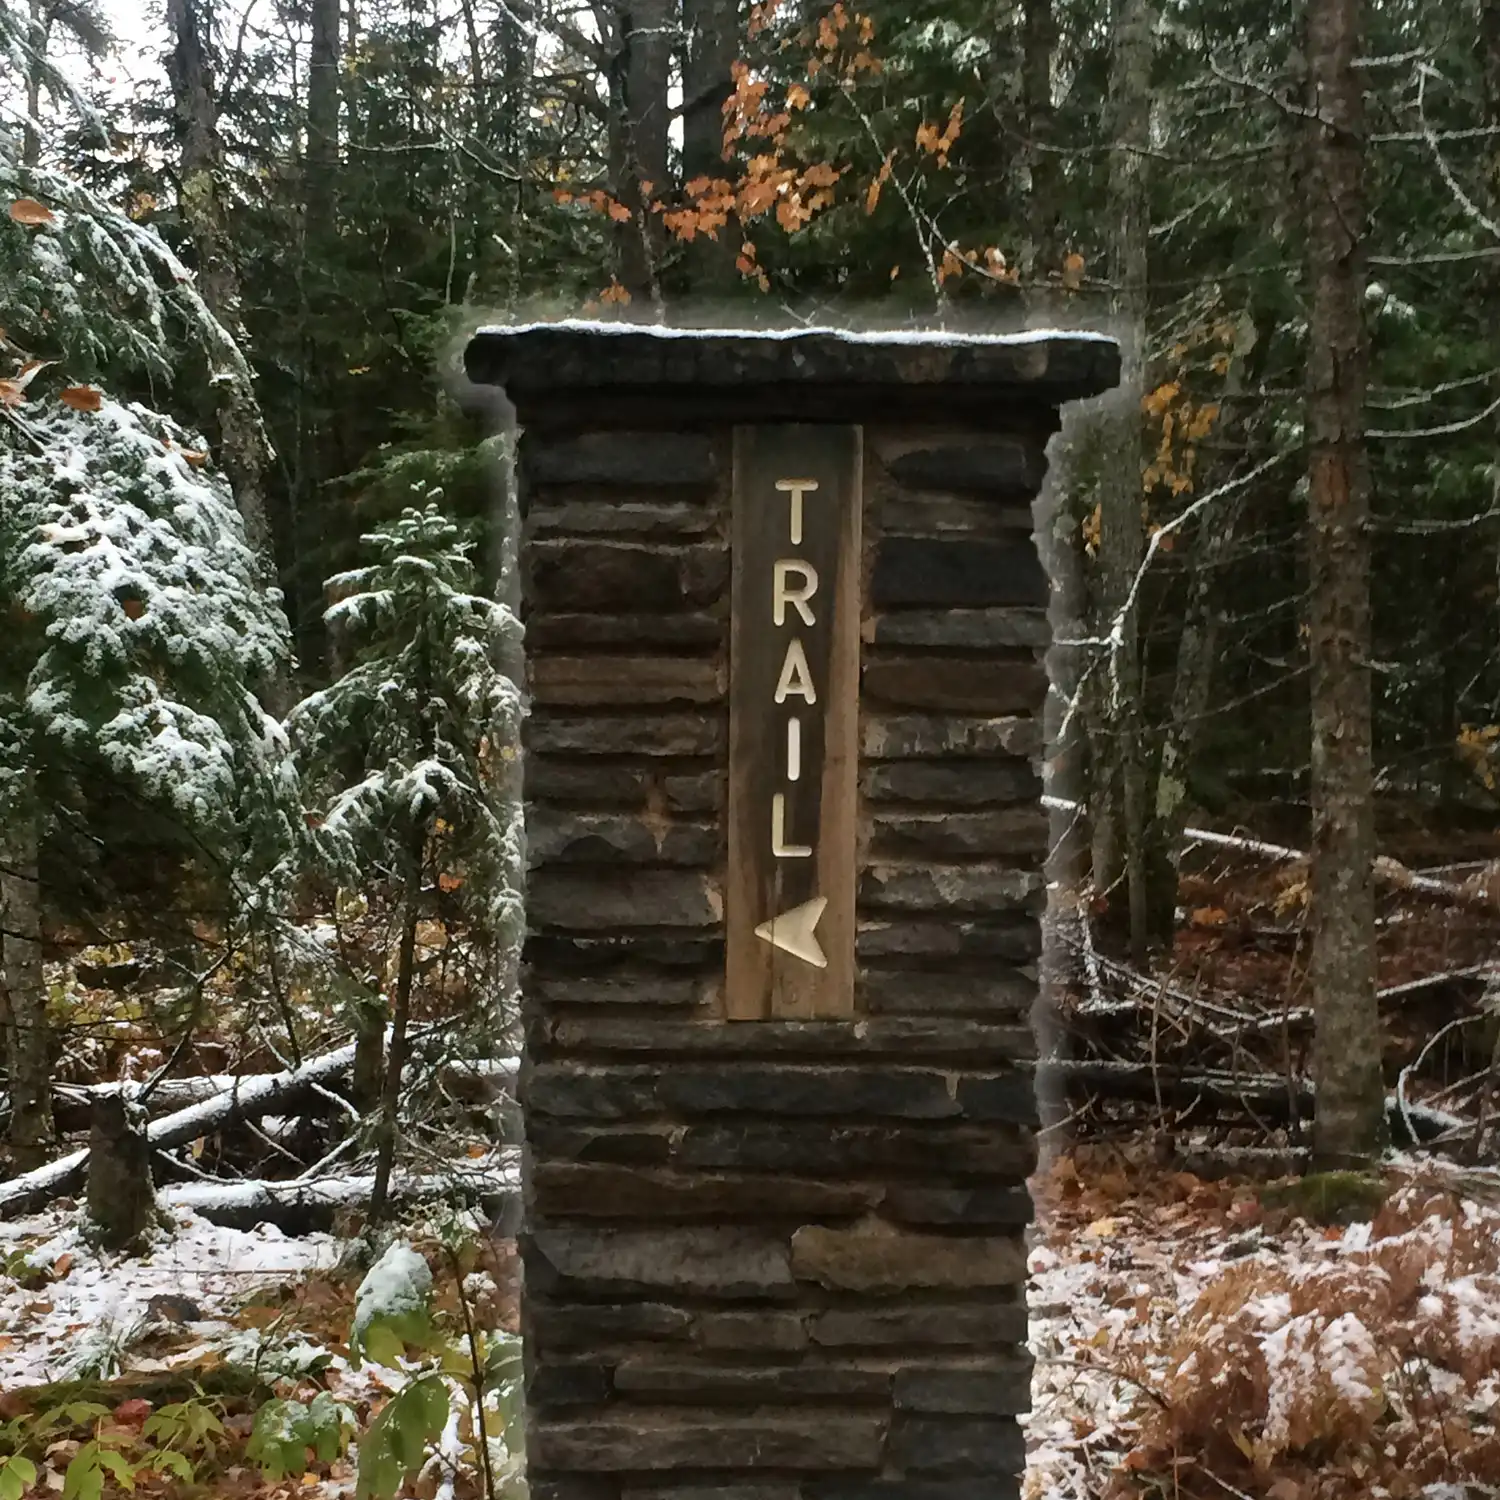 Photo of a trail marker with a snowy autumn forest in the background.